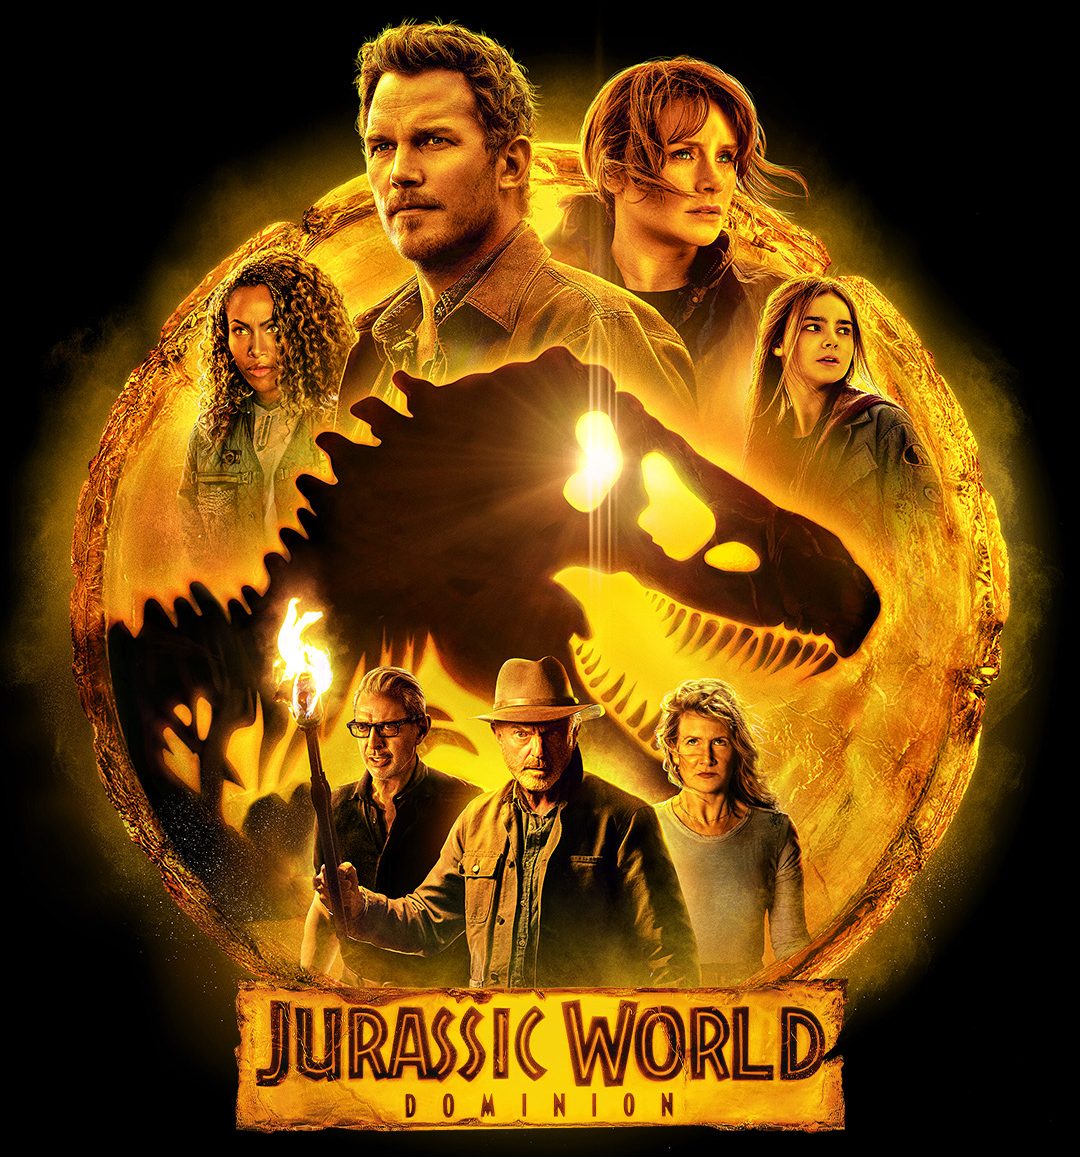 Jurassic World Dominion will be released in China